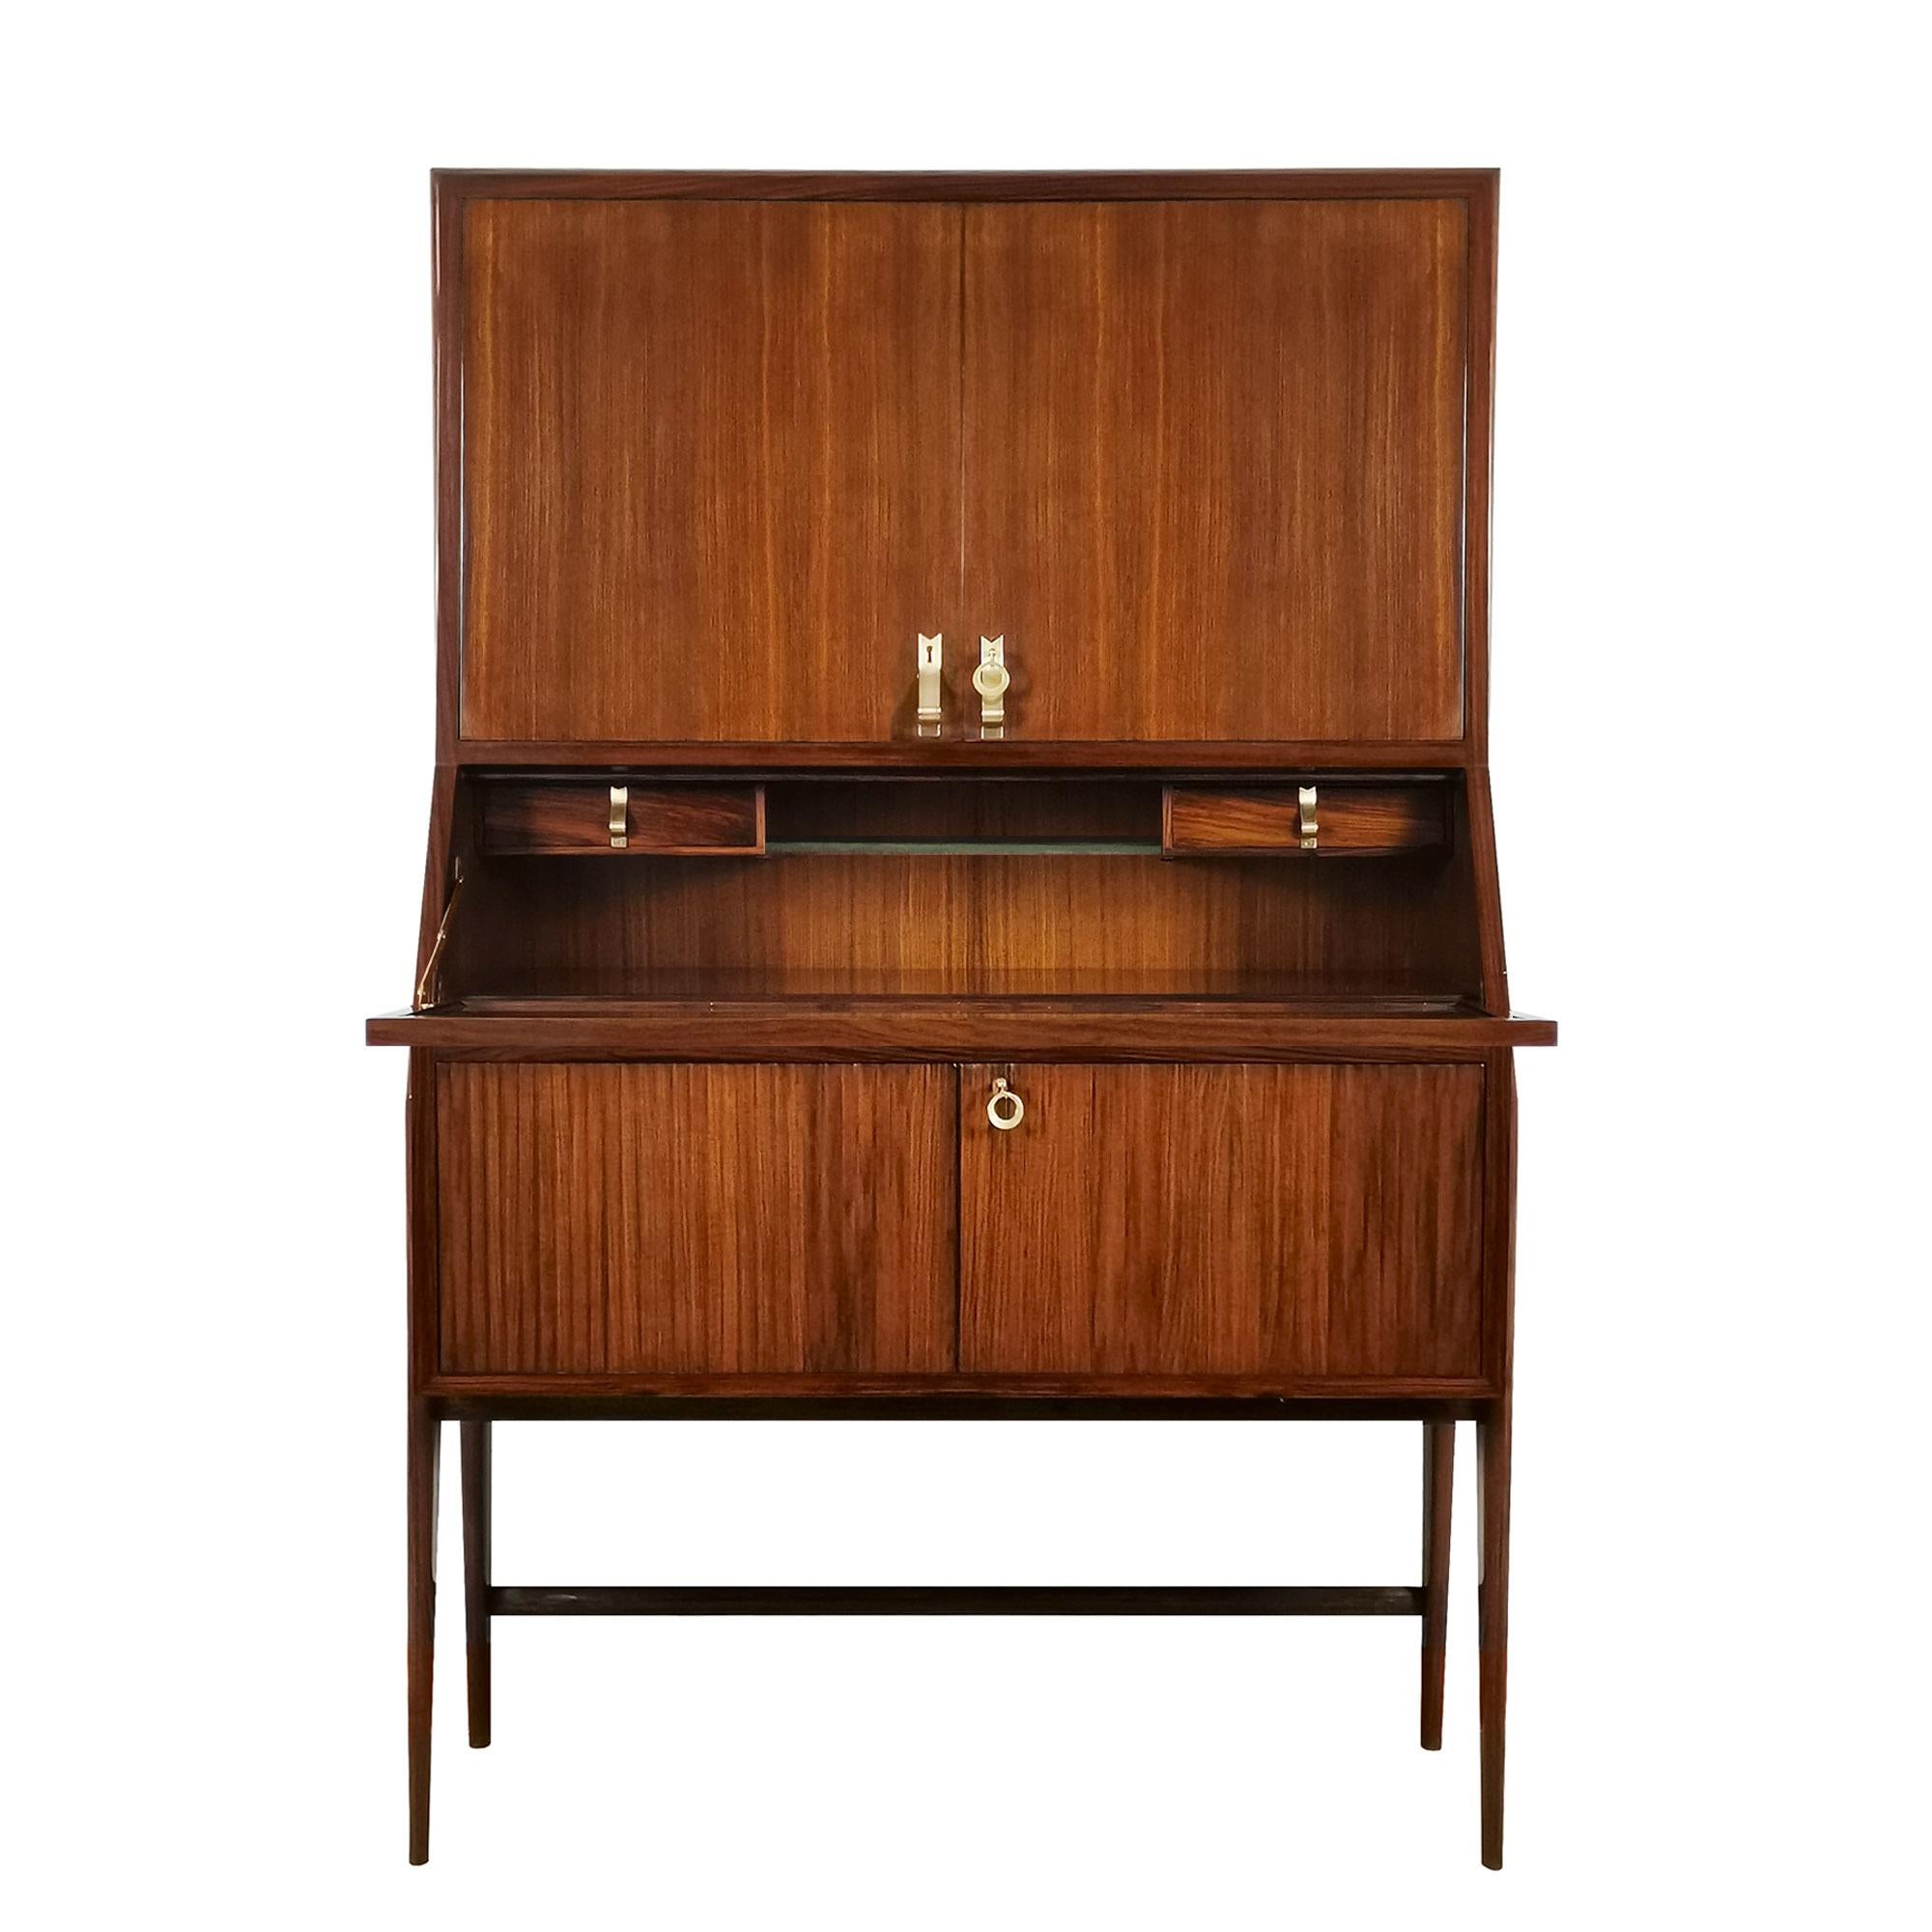 Mid-20th Century Mid-Century Modern Dry Bar by Ico Parisi in Mahogany, Glass, Brass - Italy For Sale